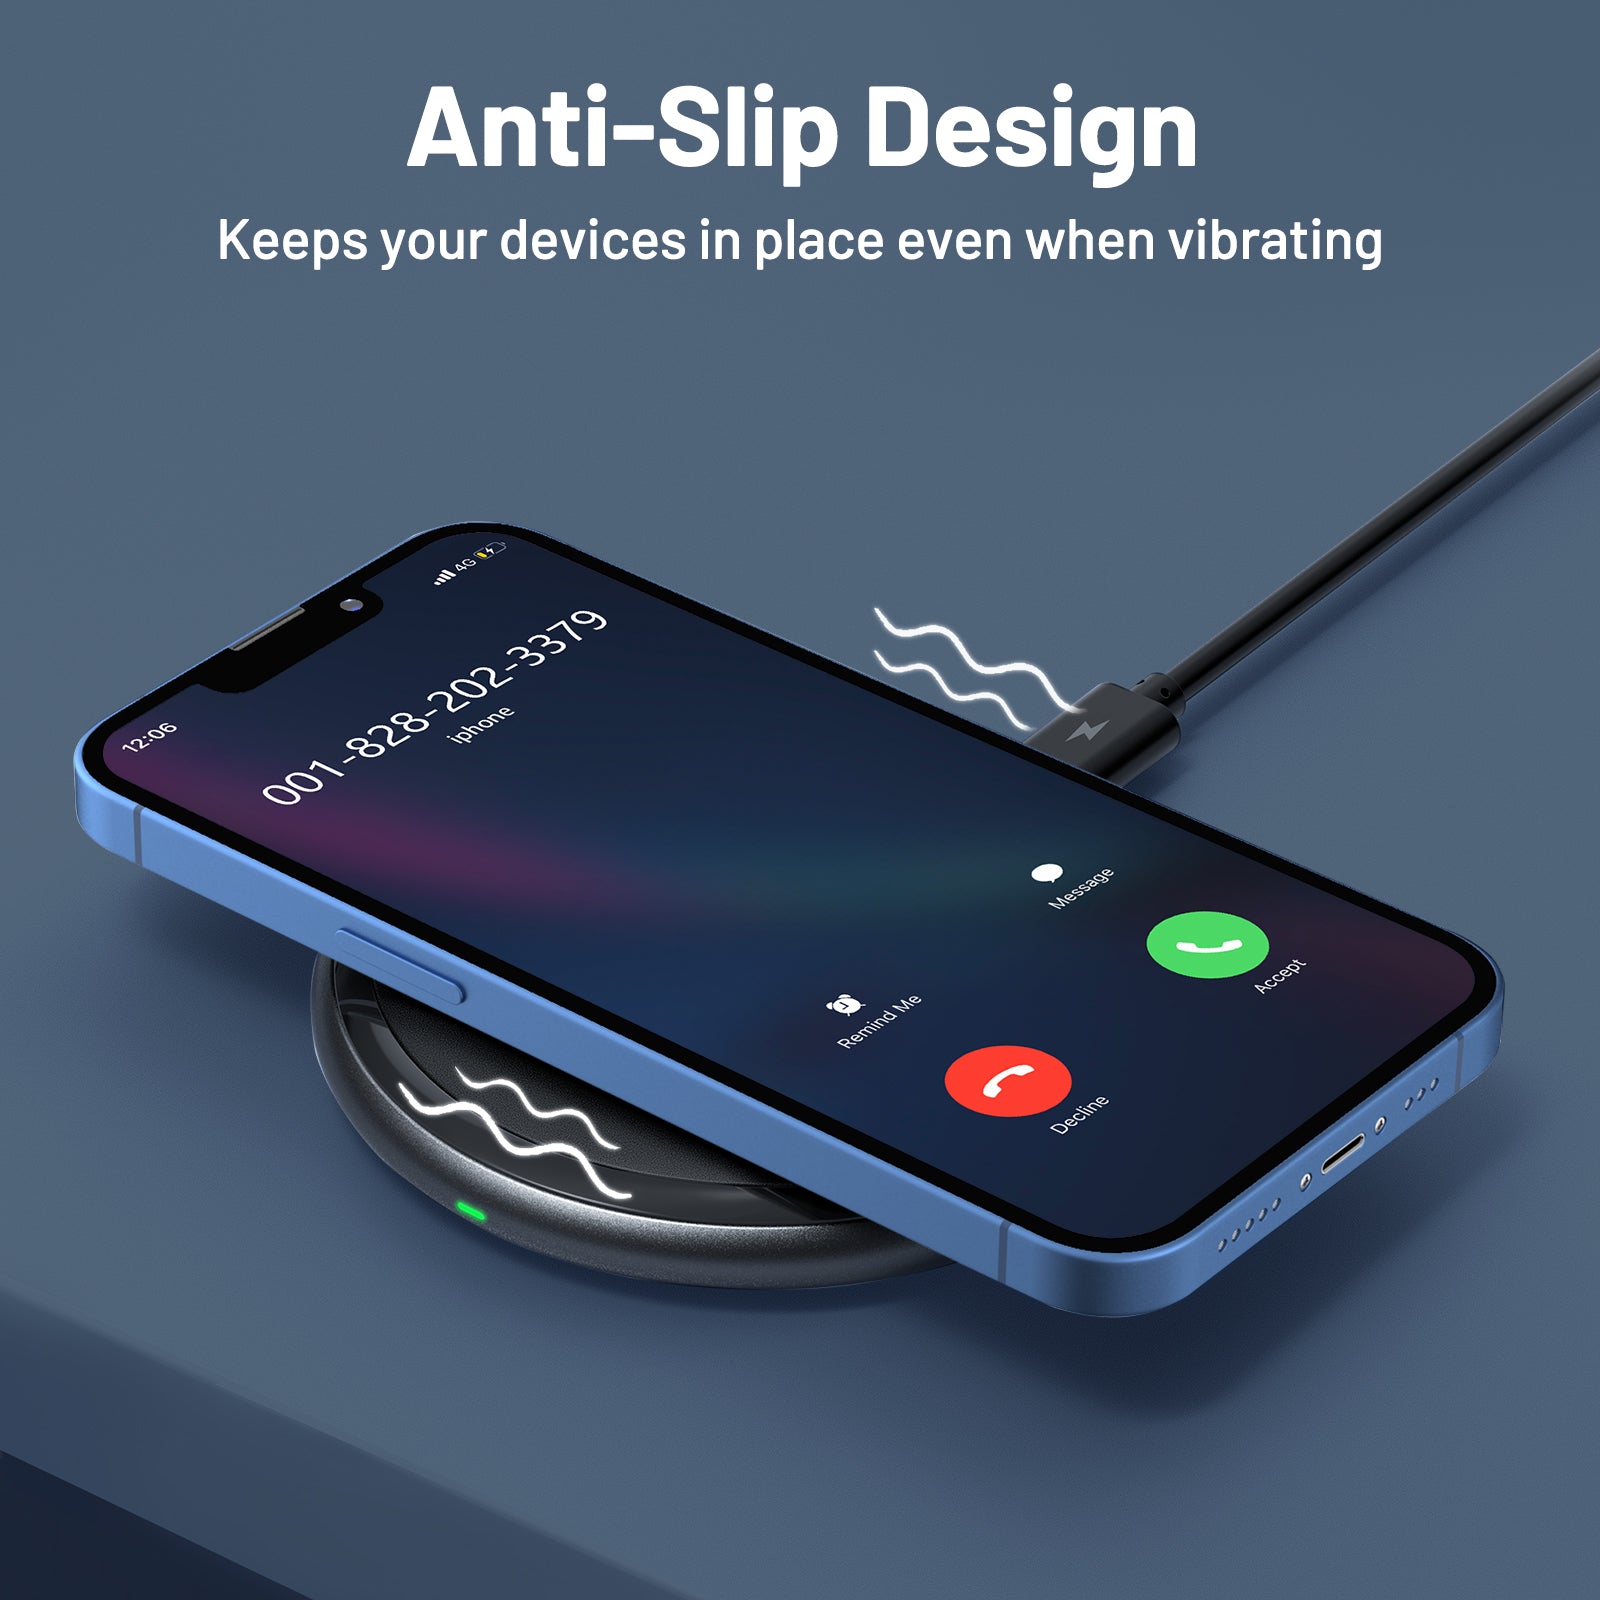 Fast Wireless Charger, RAVPower 10W Max Fast Charge Wireless Charging Pad with QC 3.0